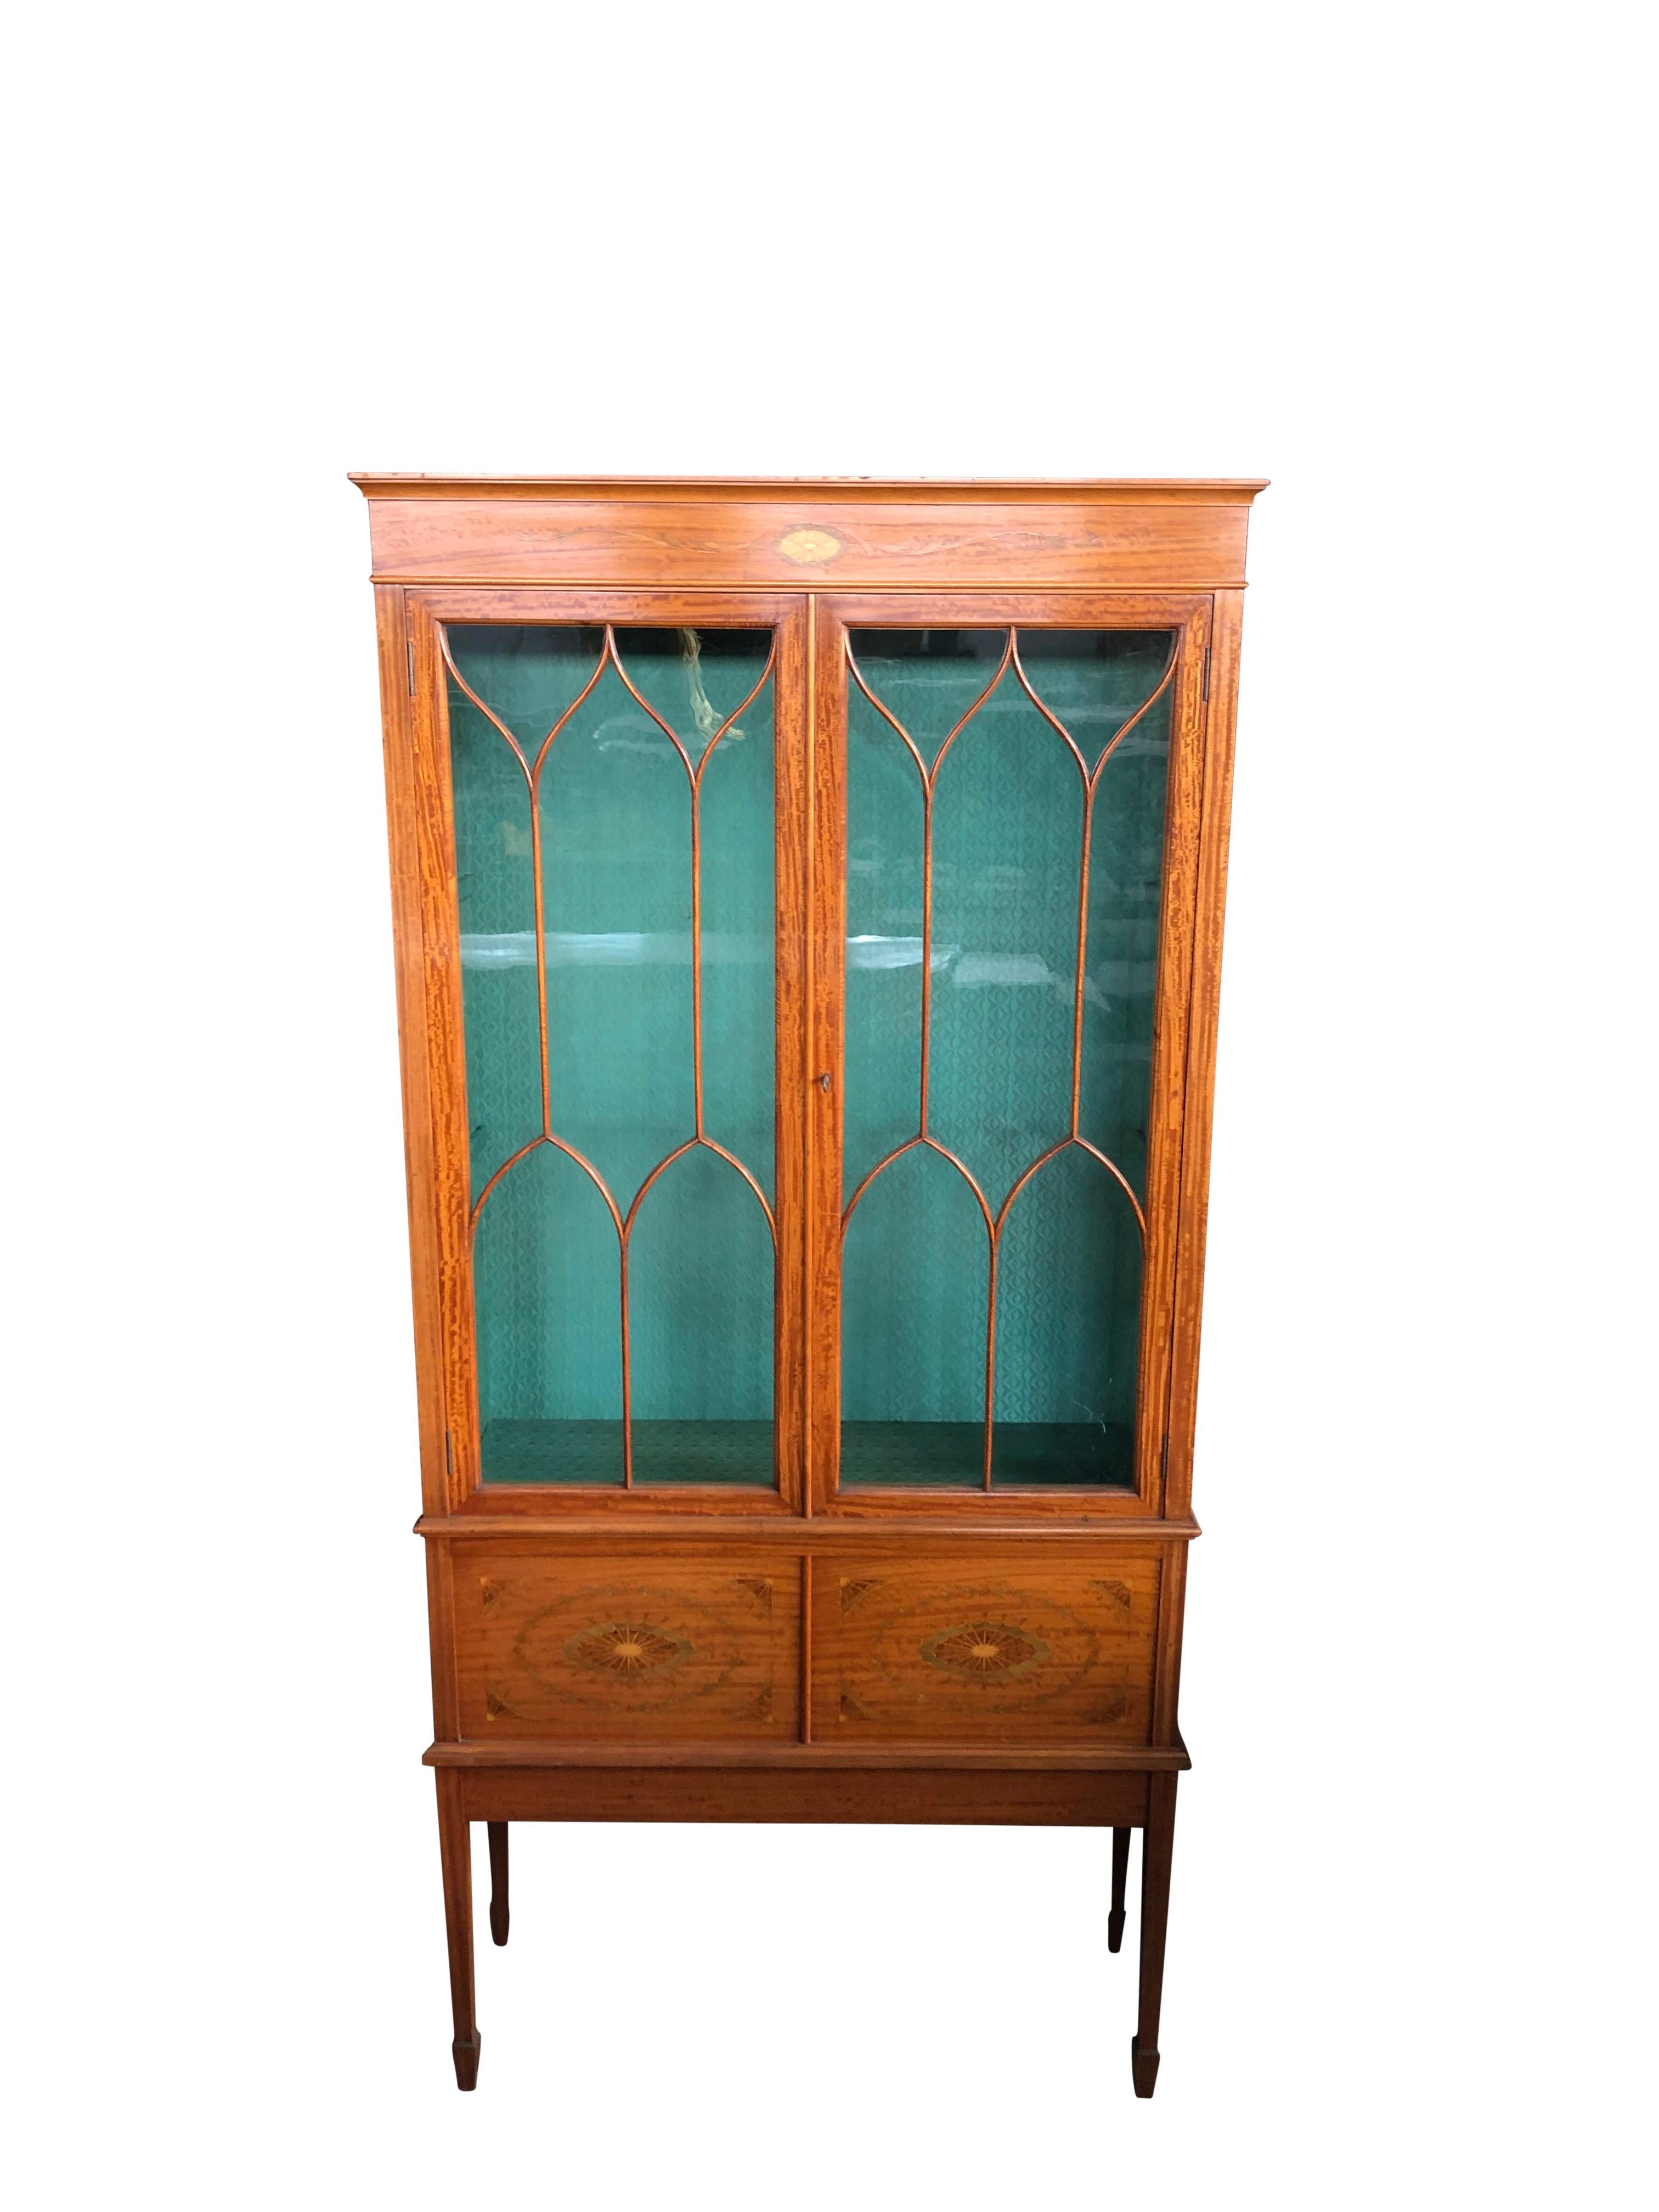 Inlay French Regency Style Sheraton Cabinet, 19th Century For Sale